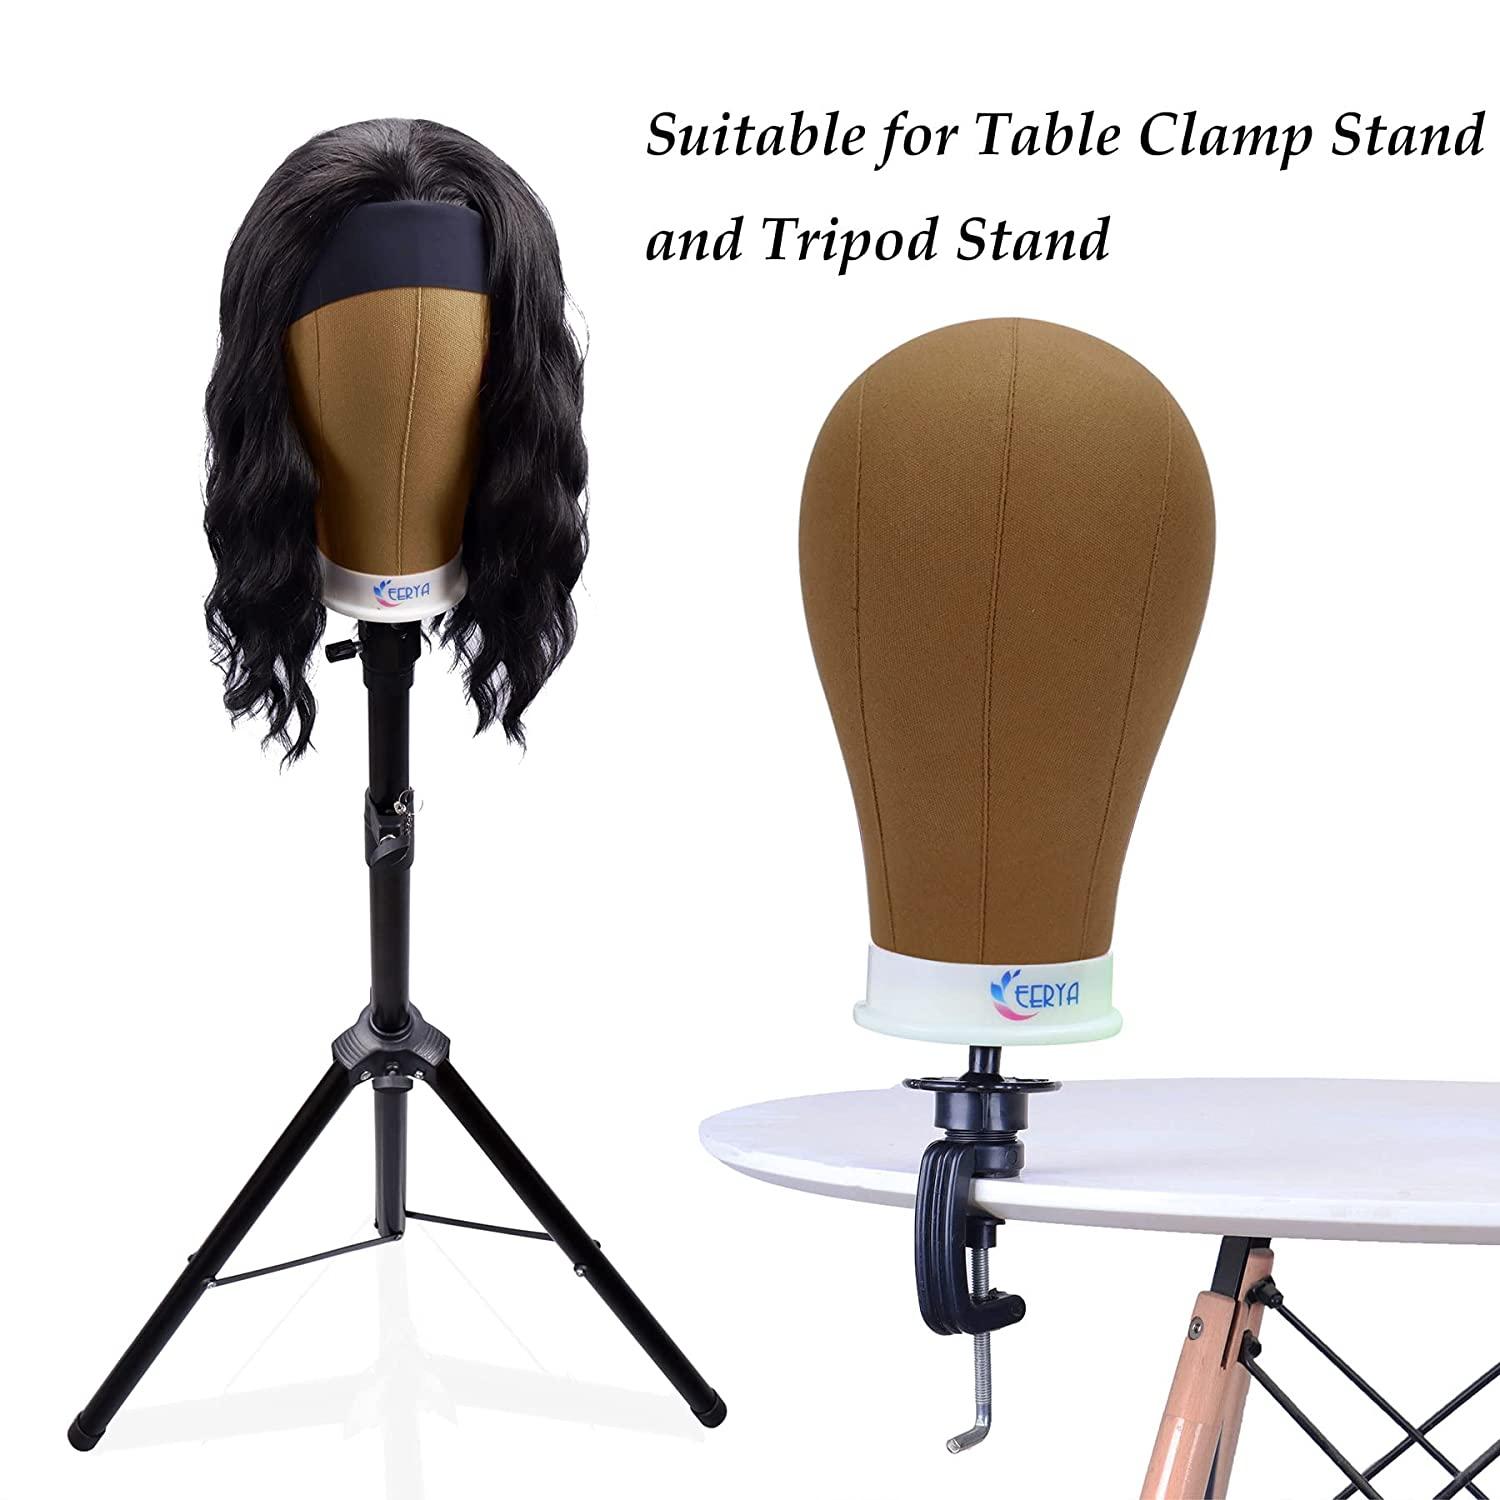  EERYA 22 Inch Wig Head, Wig Stand Tripod With Head, Wig Head  Stand With Mannequin Head, Canvas Wig Head Stand for Wig Styling Making  Displaying, Wig Mannequin Head With Stand Set(22